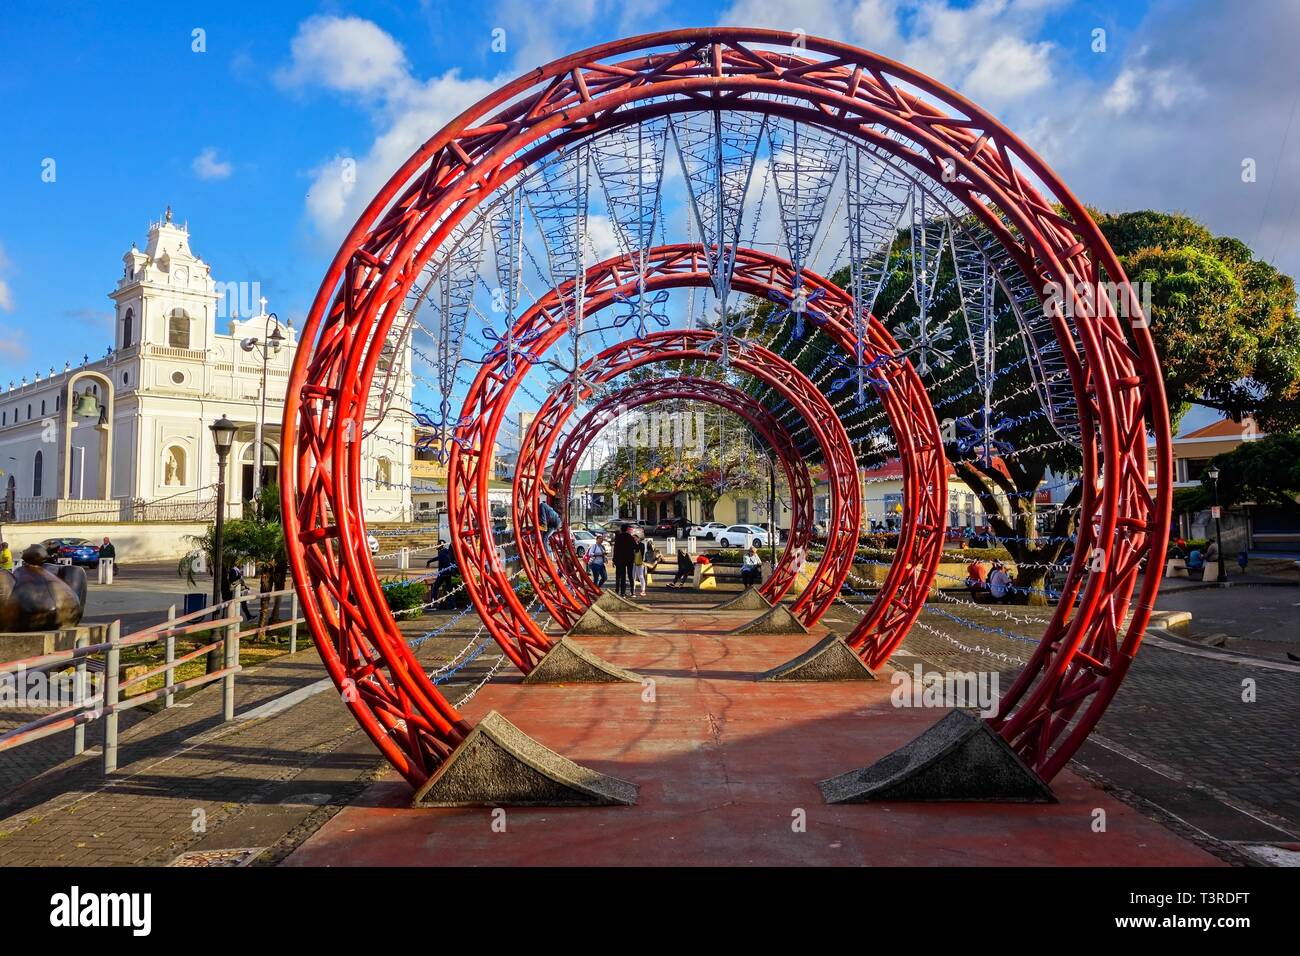 Concentric Red Circles Abstract Art Detail and Spanish Colonial Architecture on Plaza De Las Artes (Arts Town Square) San Jose Costa Rica City Center Stock Photo